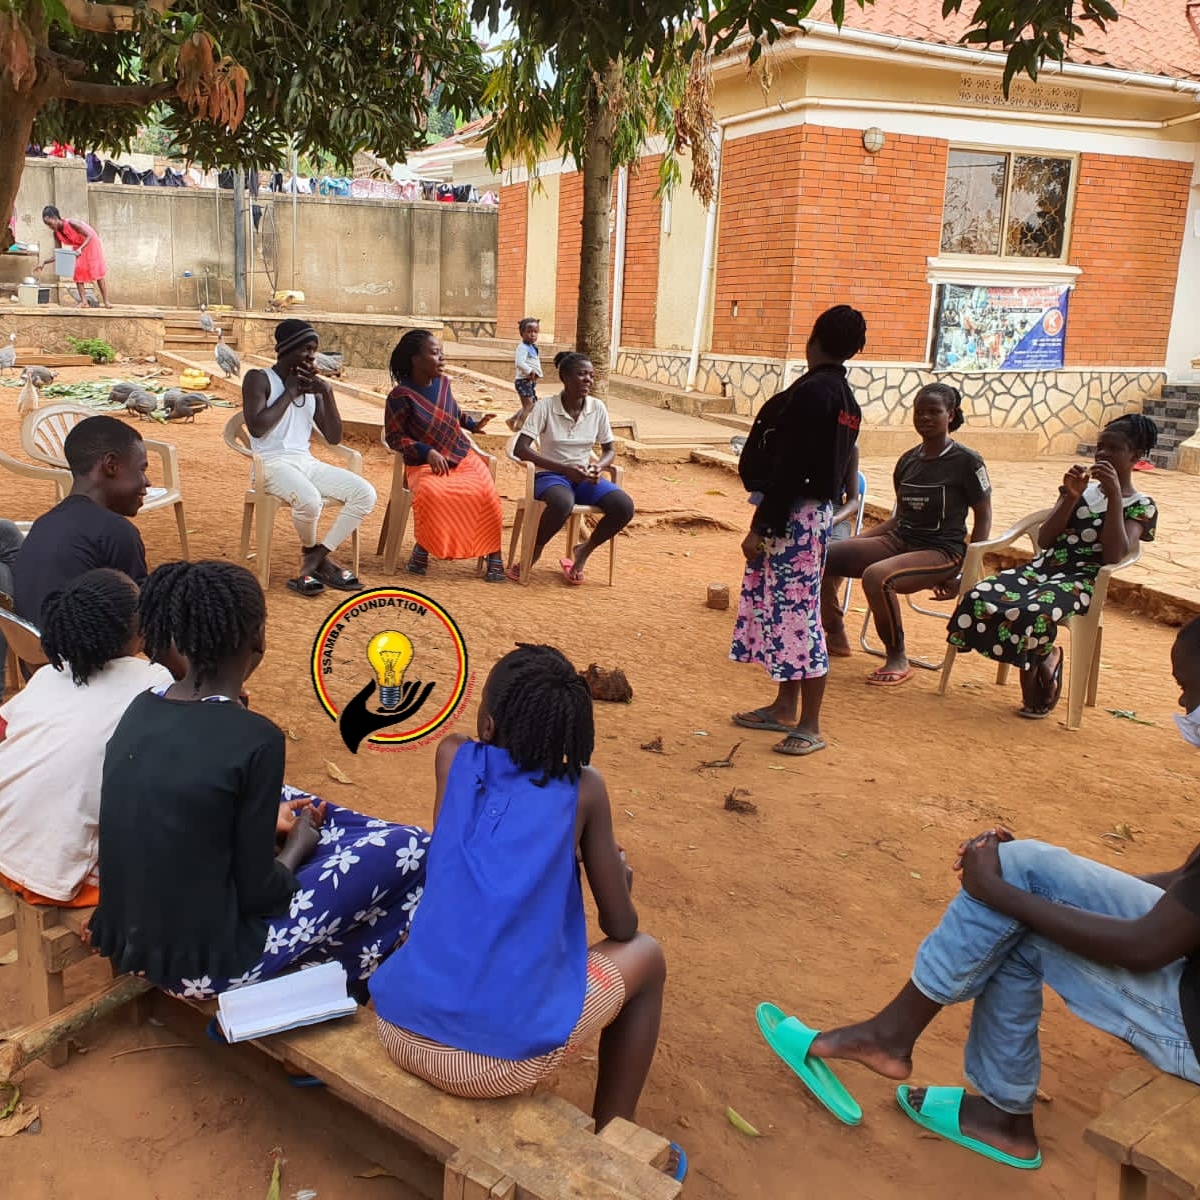 Story telling skill is developed through constant practice. Children have some really nice stories to tell if you give them a listening ear. #teachingthroughstories

office@ssamba.org ssamba.org

#stories #volunteeruganda #teachabroad #teachinuganda #ssambafoundation